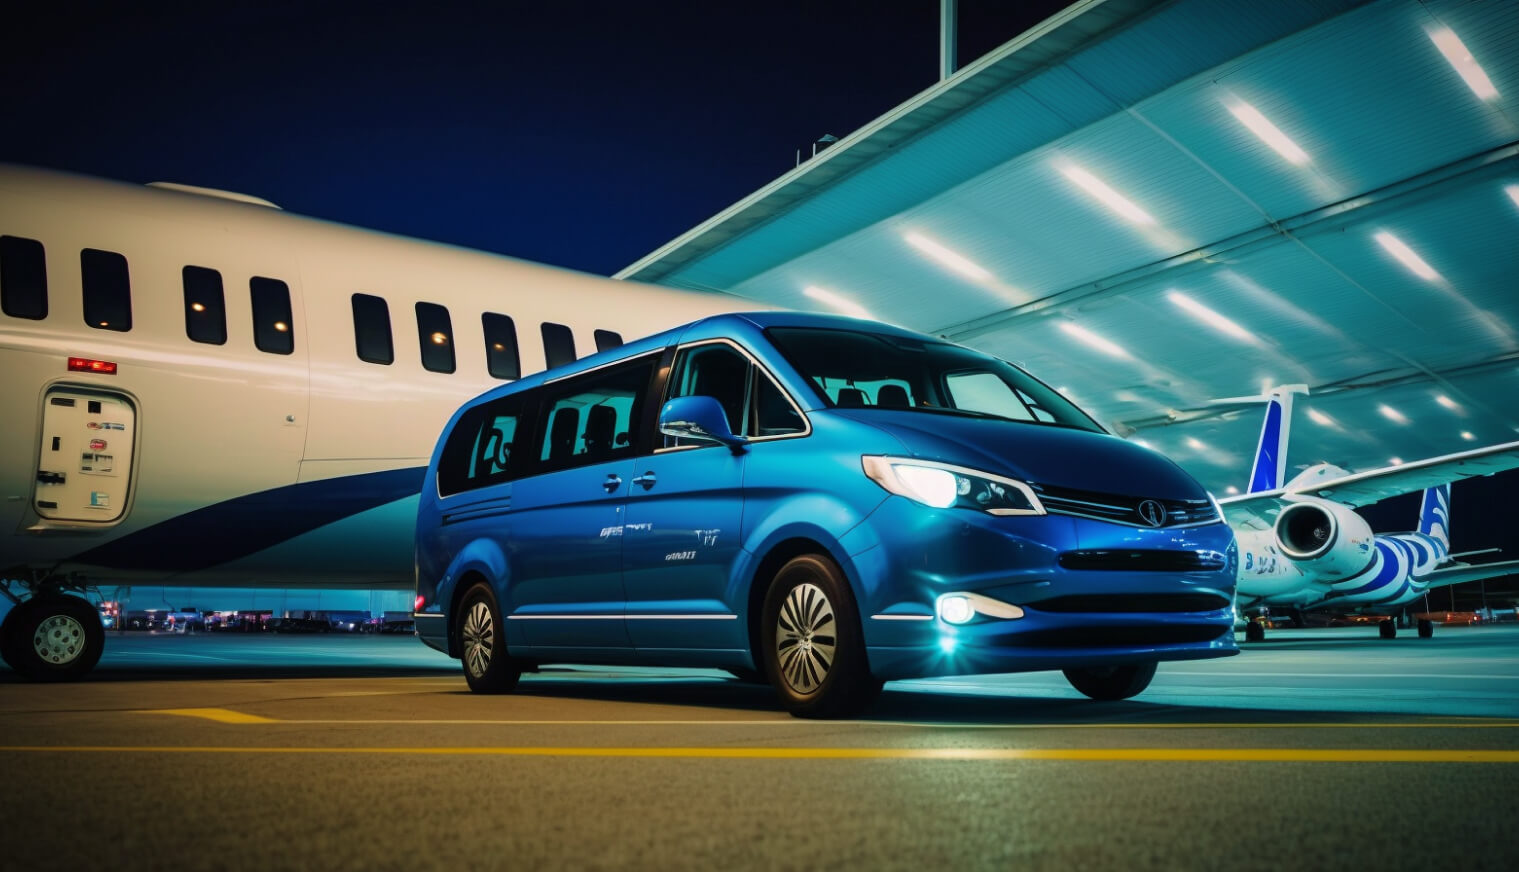 Mini-van with an airplane, in front of an airport, airport transfers